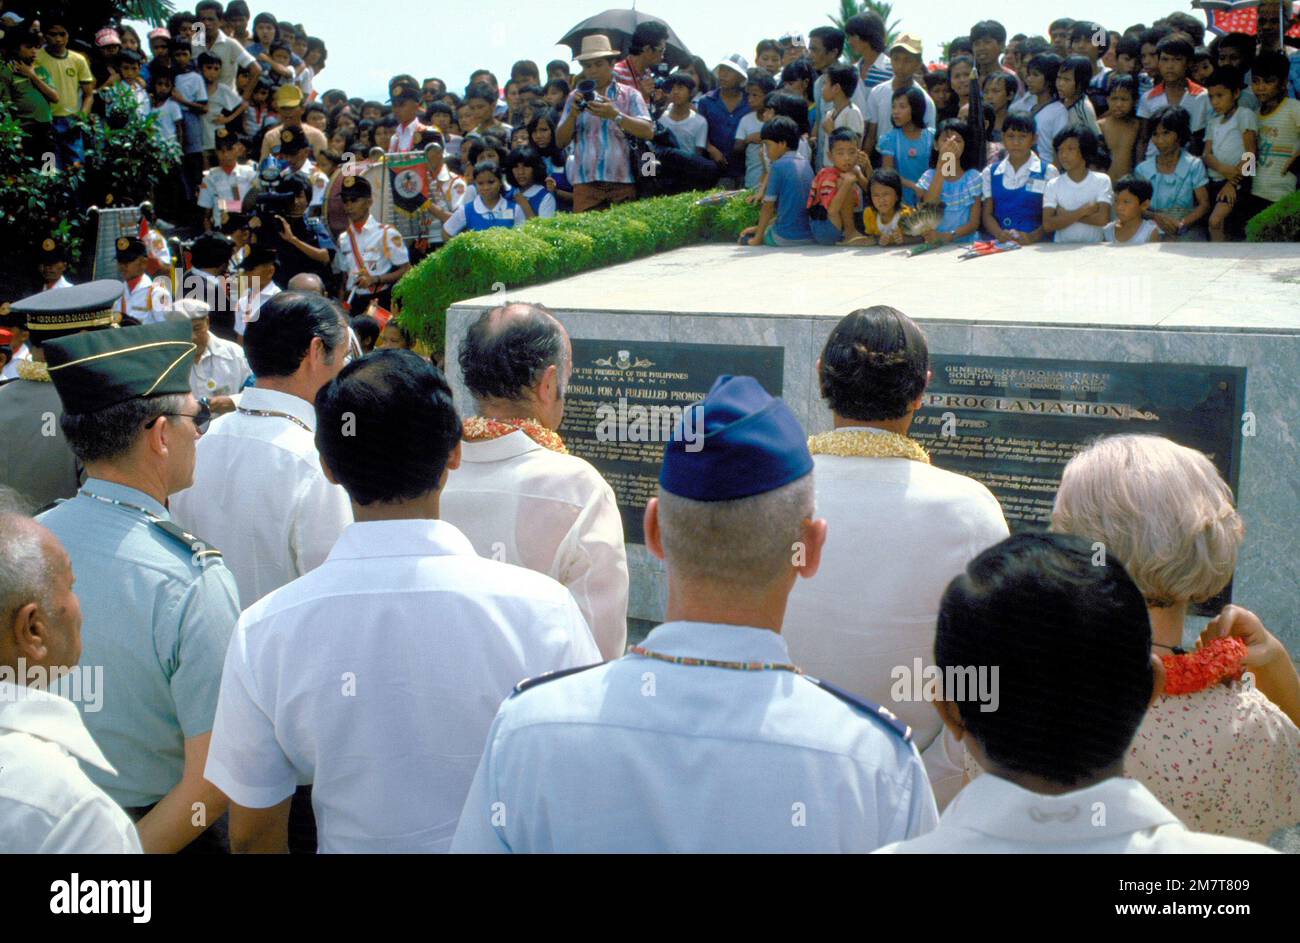 Participants observe a moment of silence near a monument in MacArthur Park during ceremonies commemorating GEN Douglas MacArthur's return here 37 years ago. MacArthur's return fulfilled his earlier and oft-quoted promise of 'I shall return'. Base: Leyte Country: Philippines Stock Photo